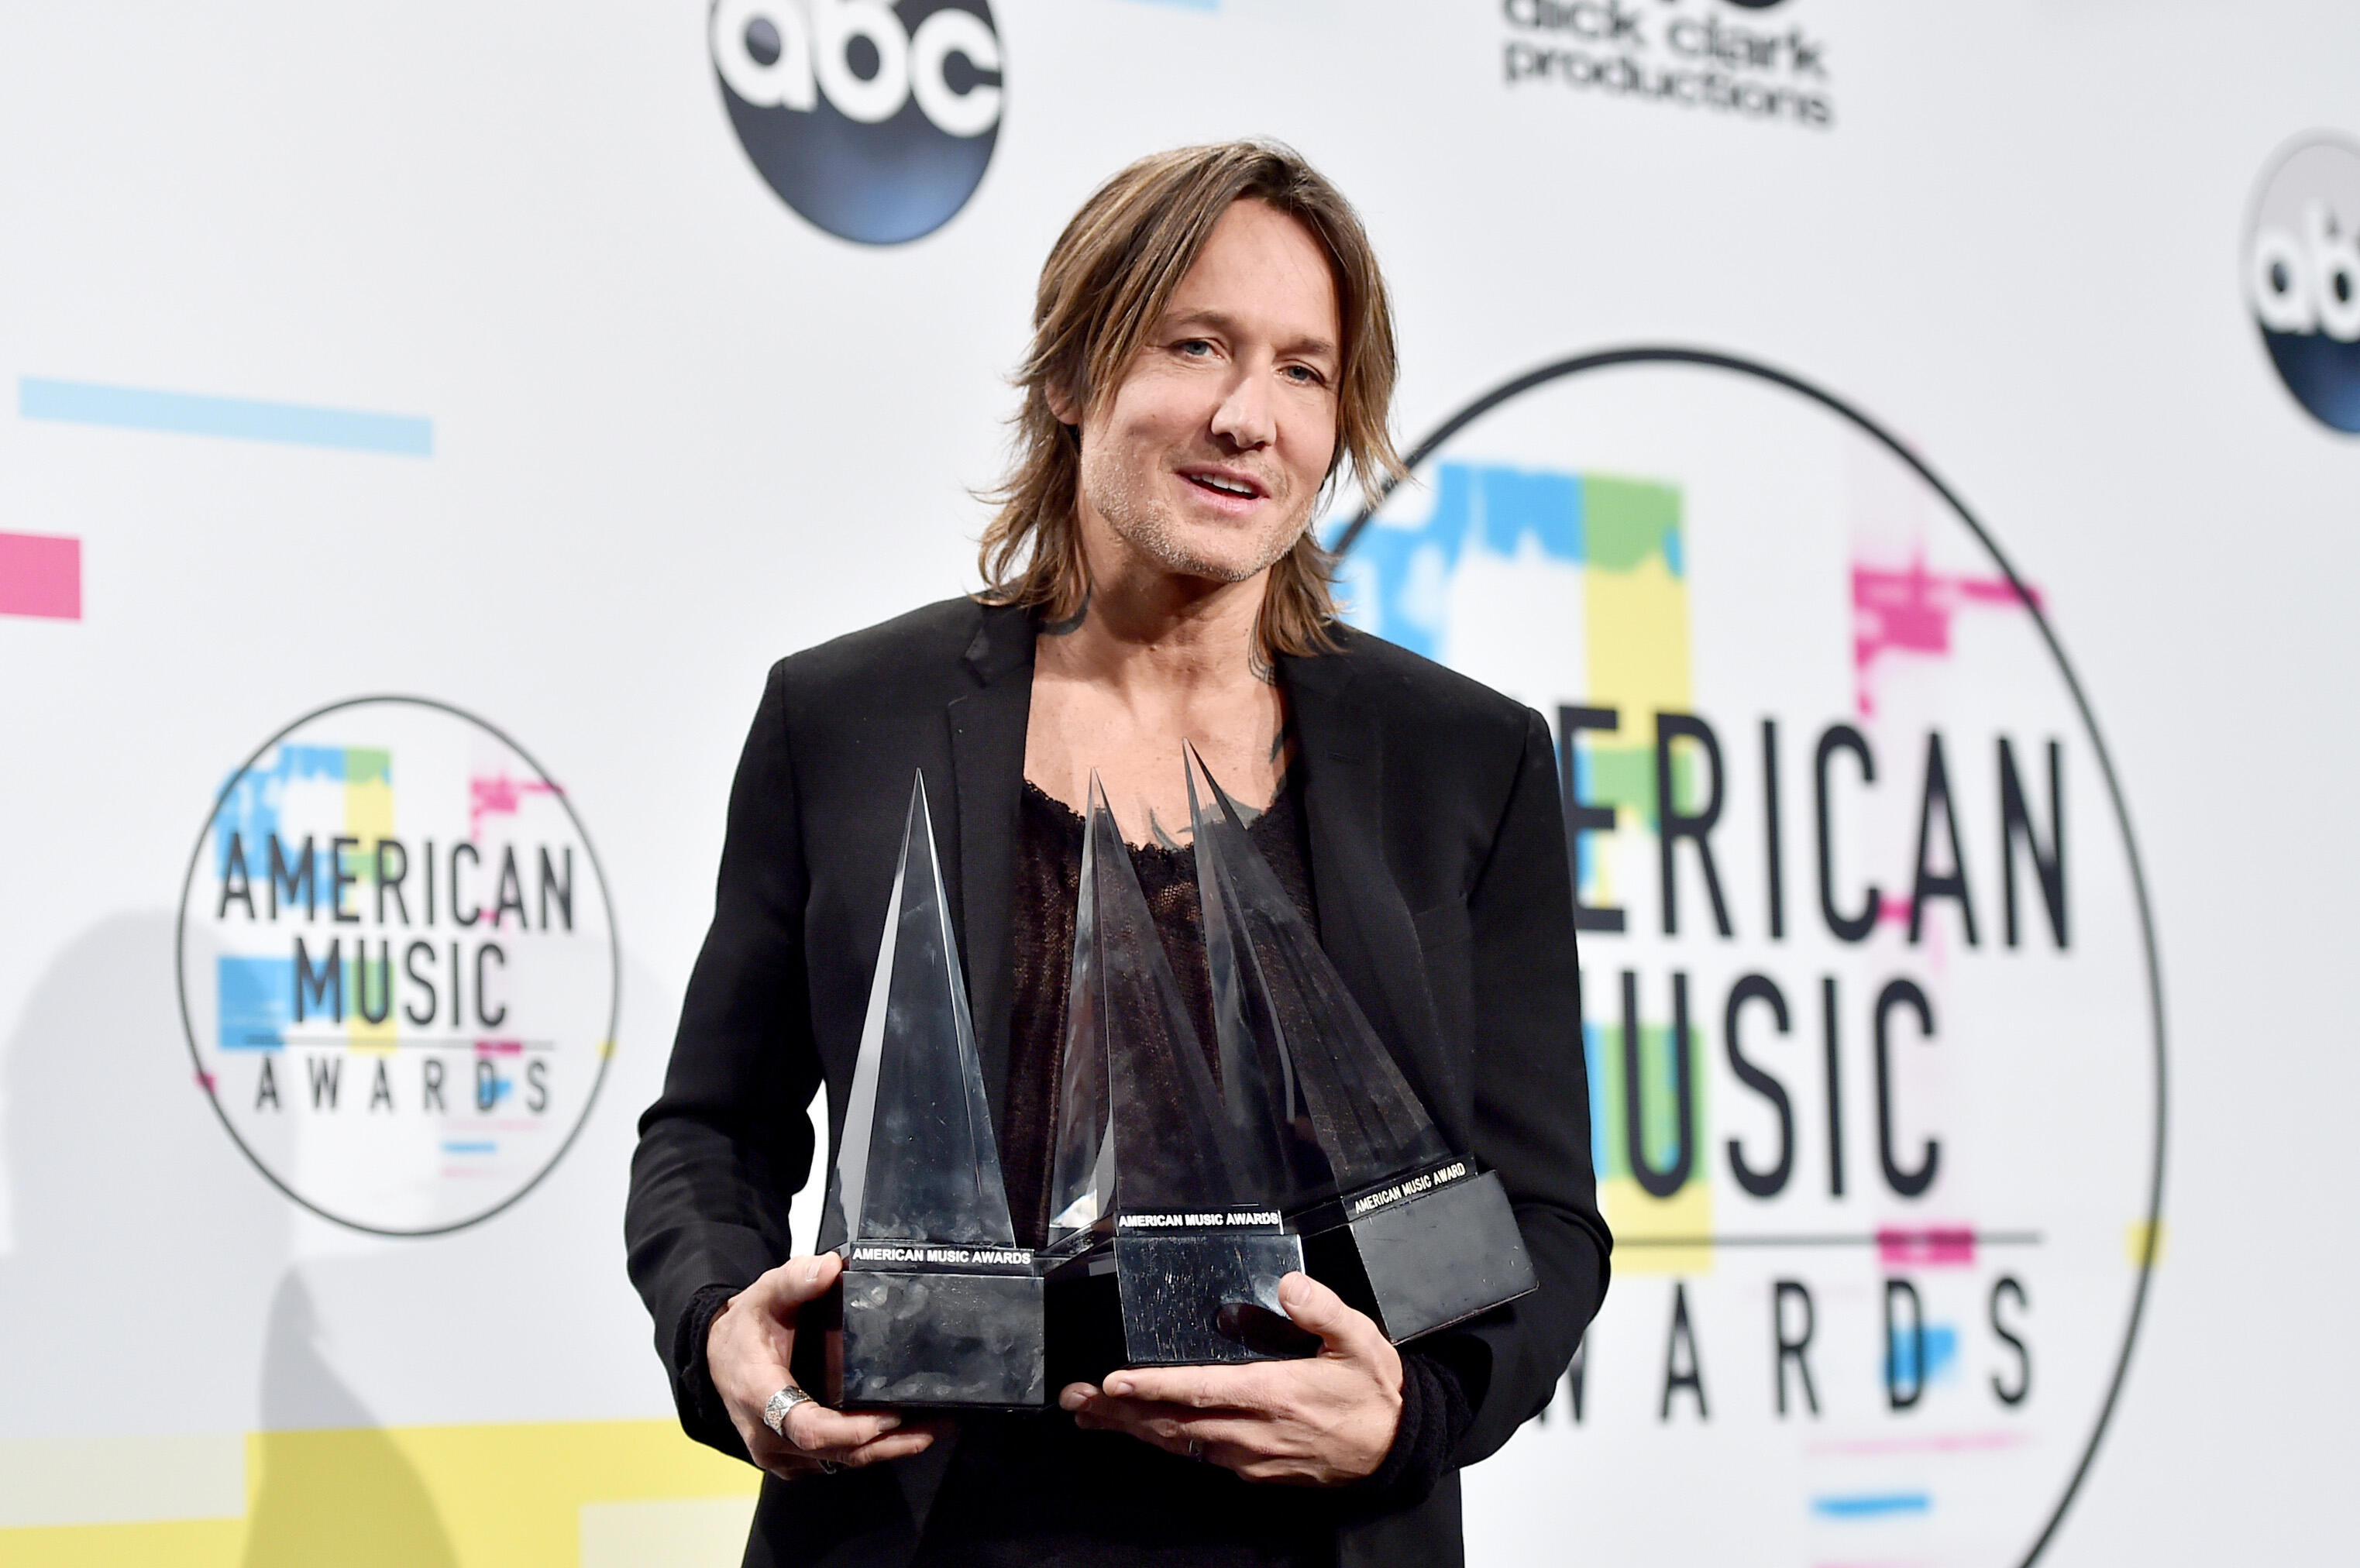 LOS ANGELES, CA - NOVEMBER 19: Keith Urban poses in the press room during the 2017 American Music Awards at Microsoft Theater on November 19, 2017 in Los Angeles, California. (Photo by Alberto E. Rodriguez/Getty Images) 